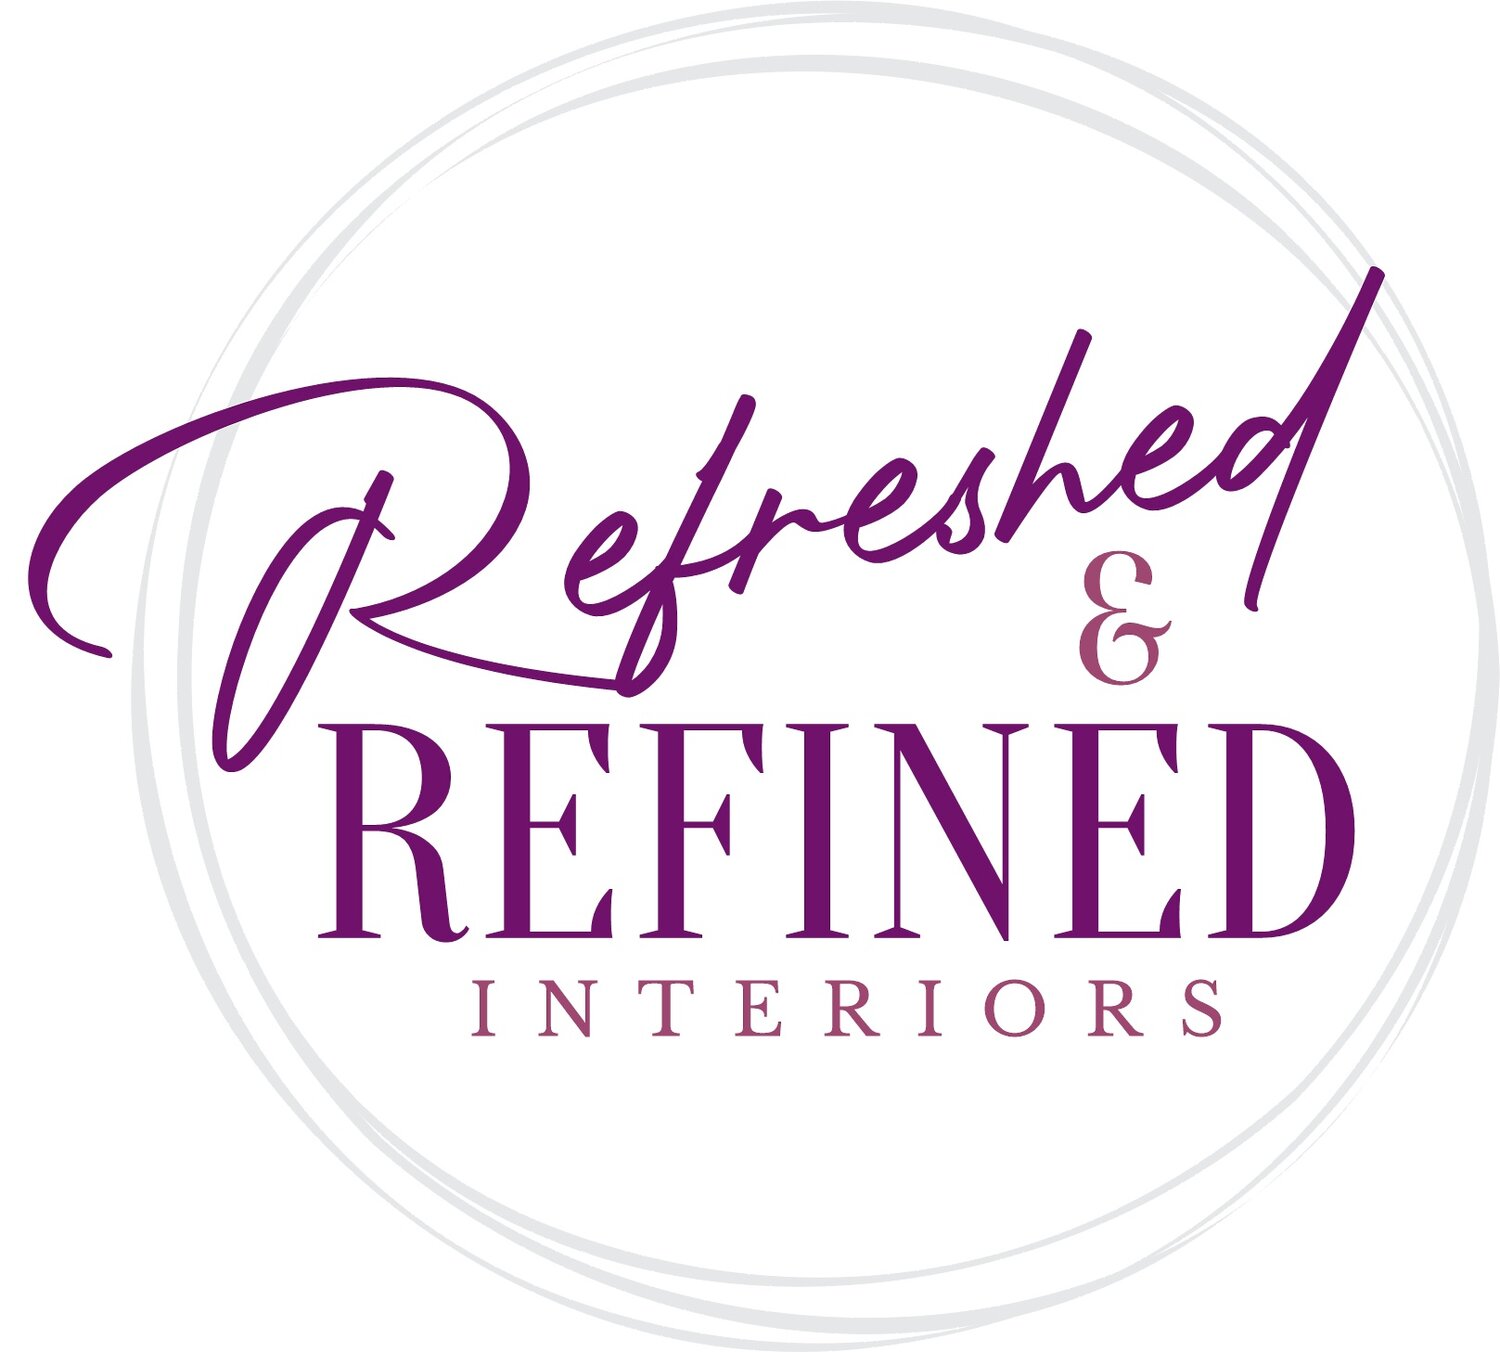 Refreshed & Refined Interiors